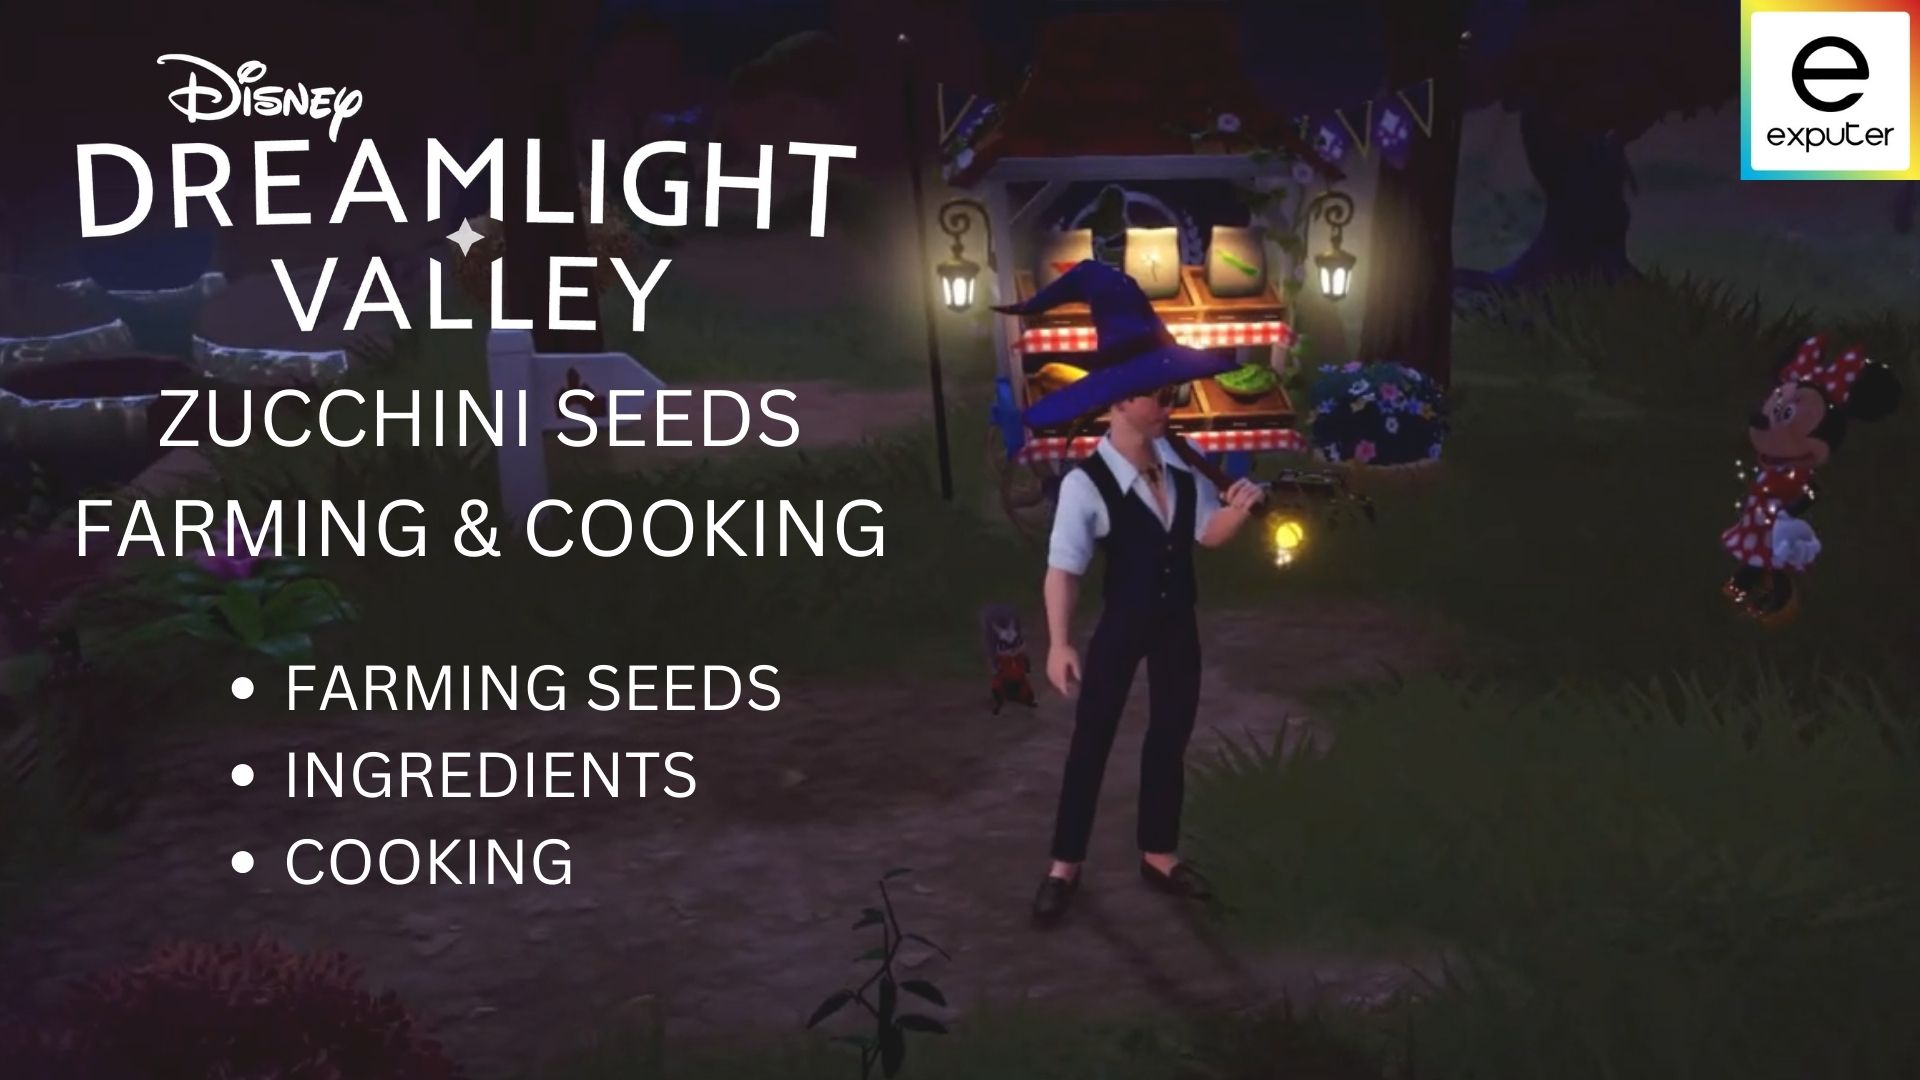 Disney Dreamlight Valley Zucchini Seeds Farming & Cooking